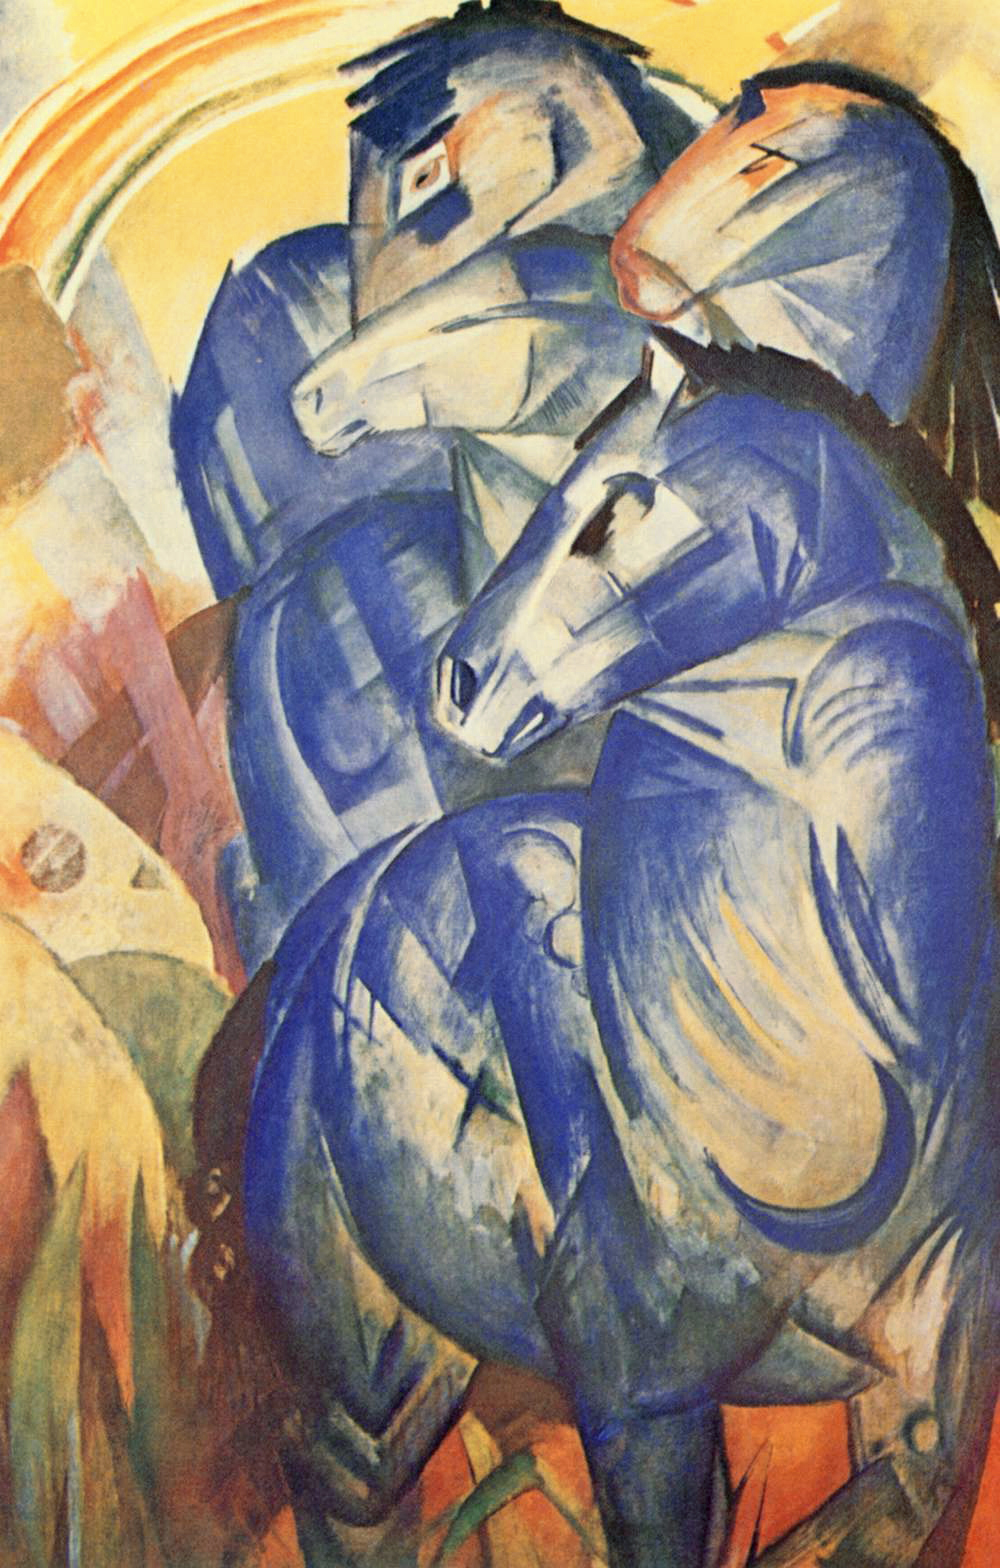 Franz Marc "The Tower Of Blue Horses" (1913)